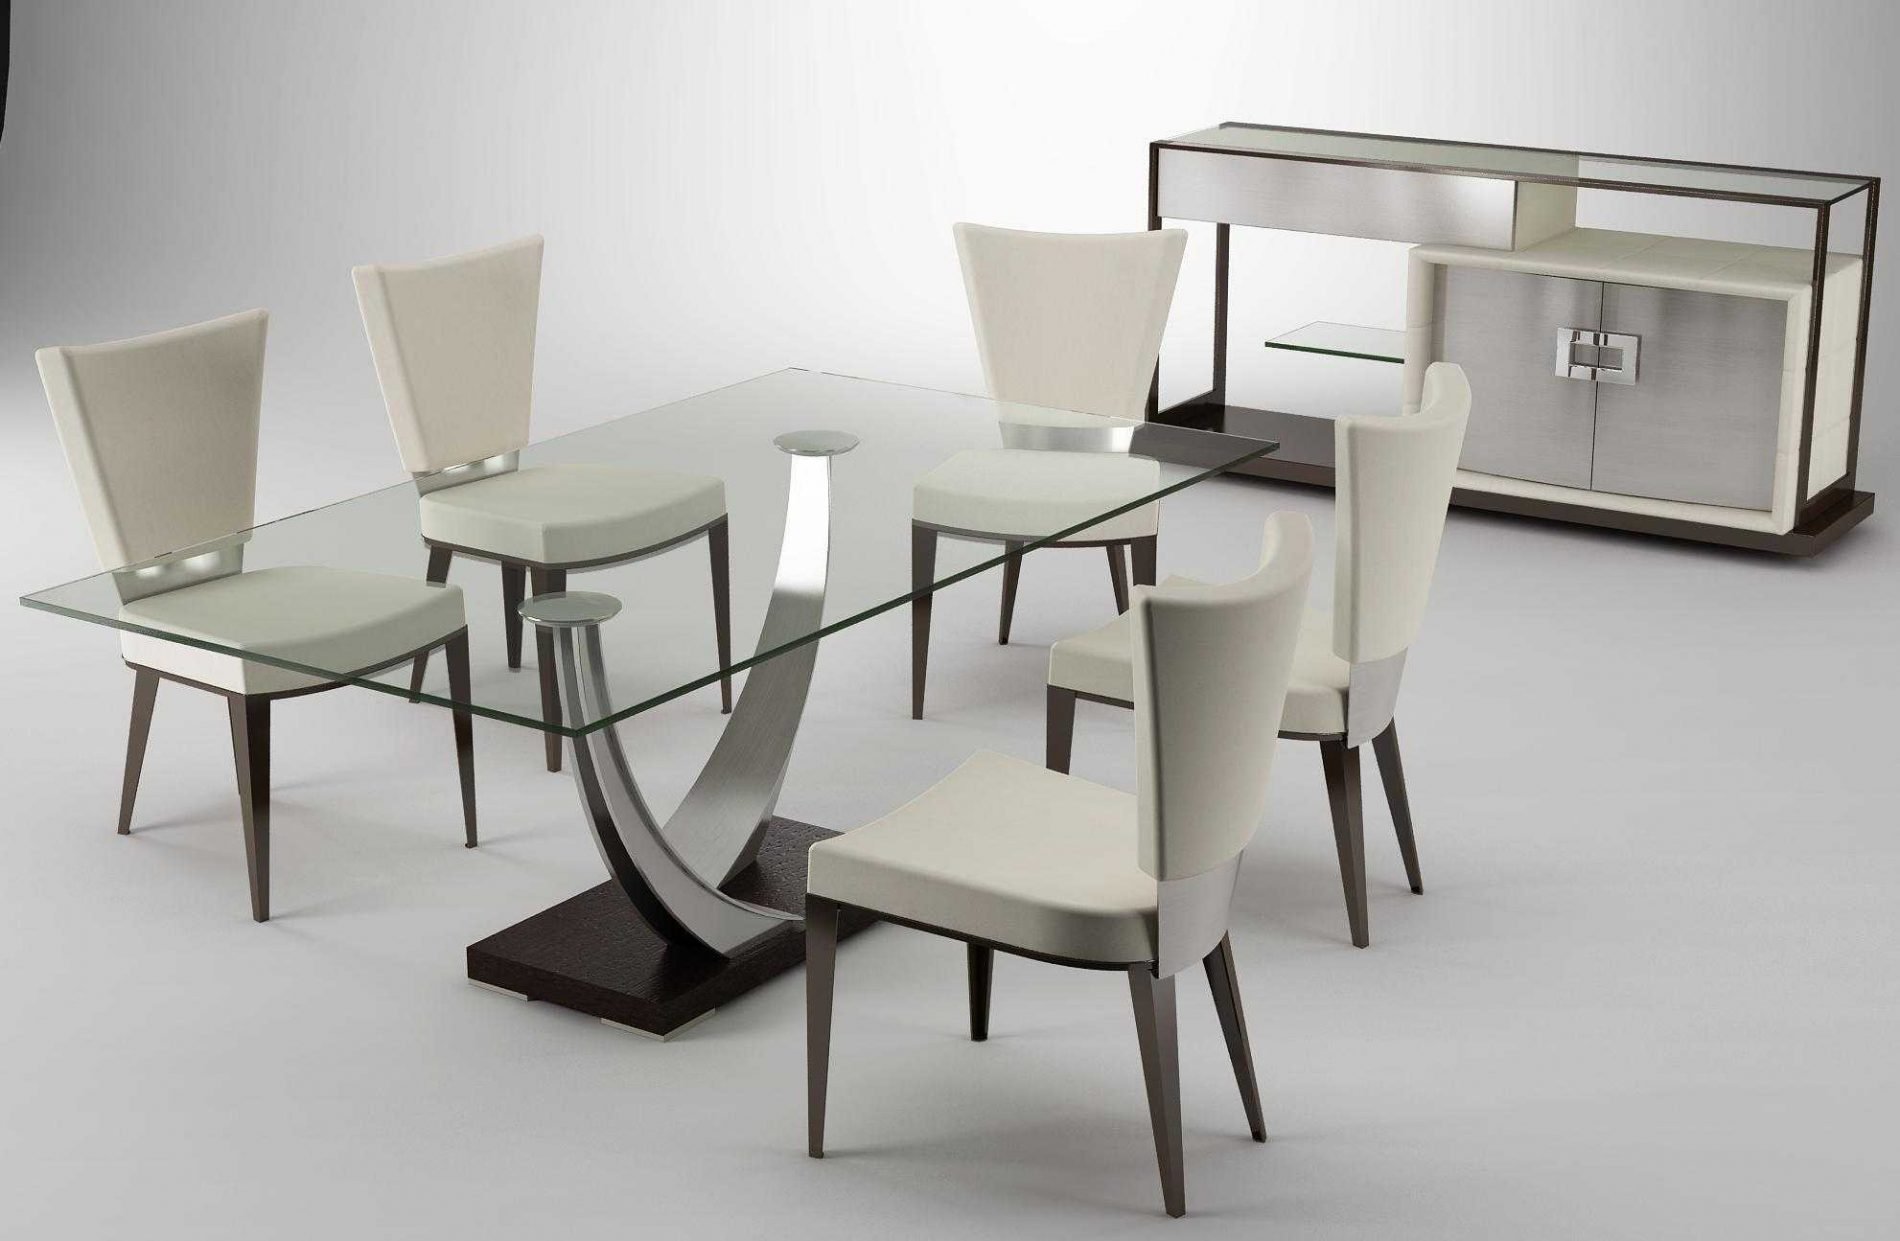 Benefits And Limitations Of Buying Dining Tables For Sale